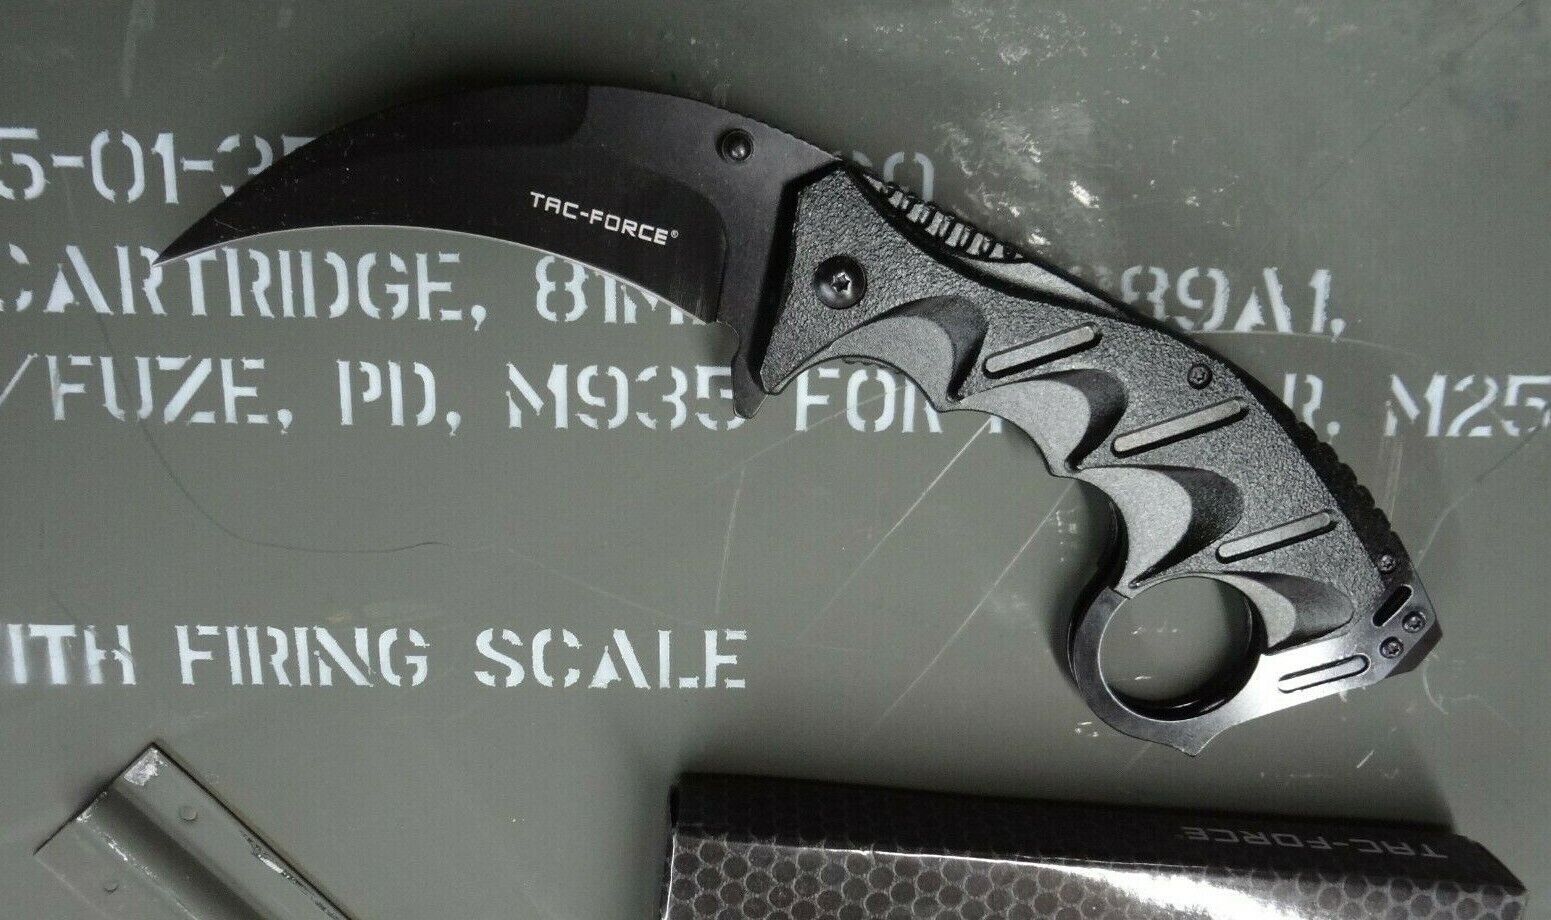 *SPECIAL PRICE* Tac-Force Karambit Assisted Pocket Knife Tactical Hawkbill Claw